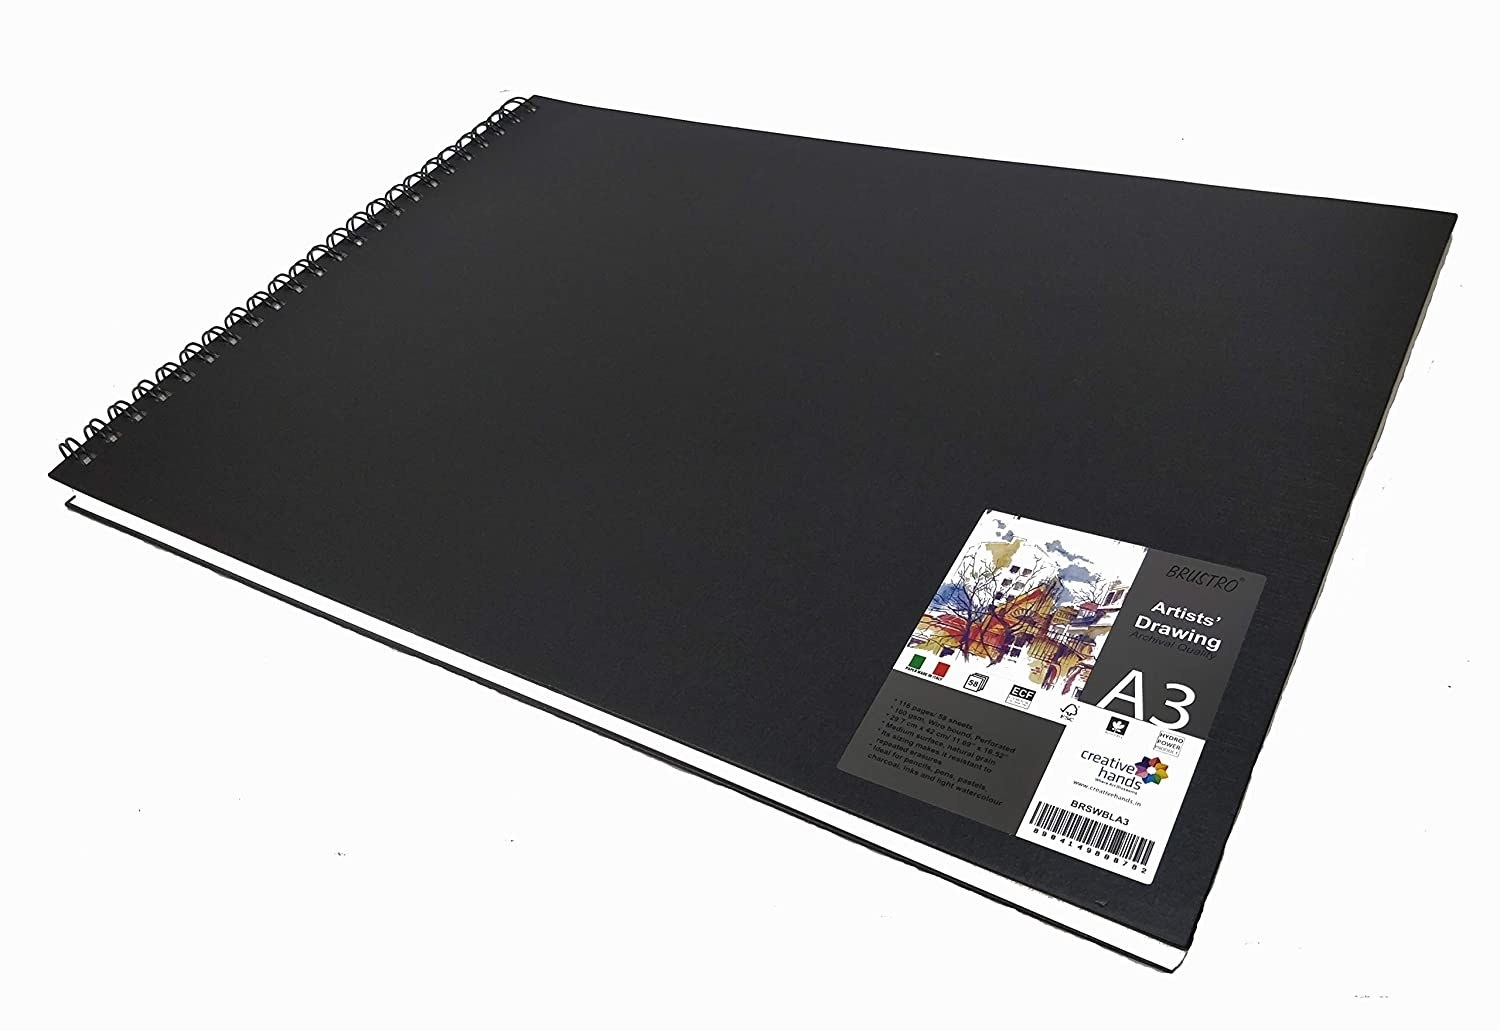 A closed sketch book with a black cover.